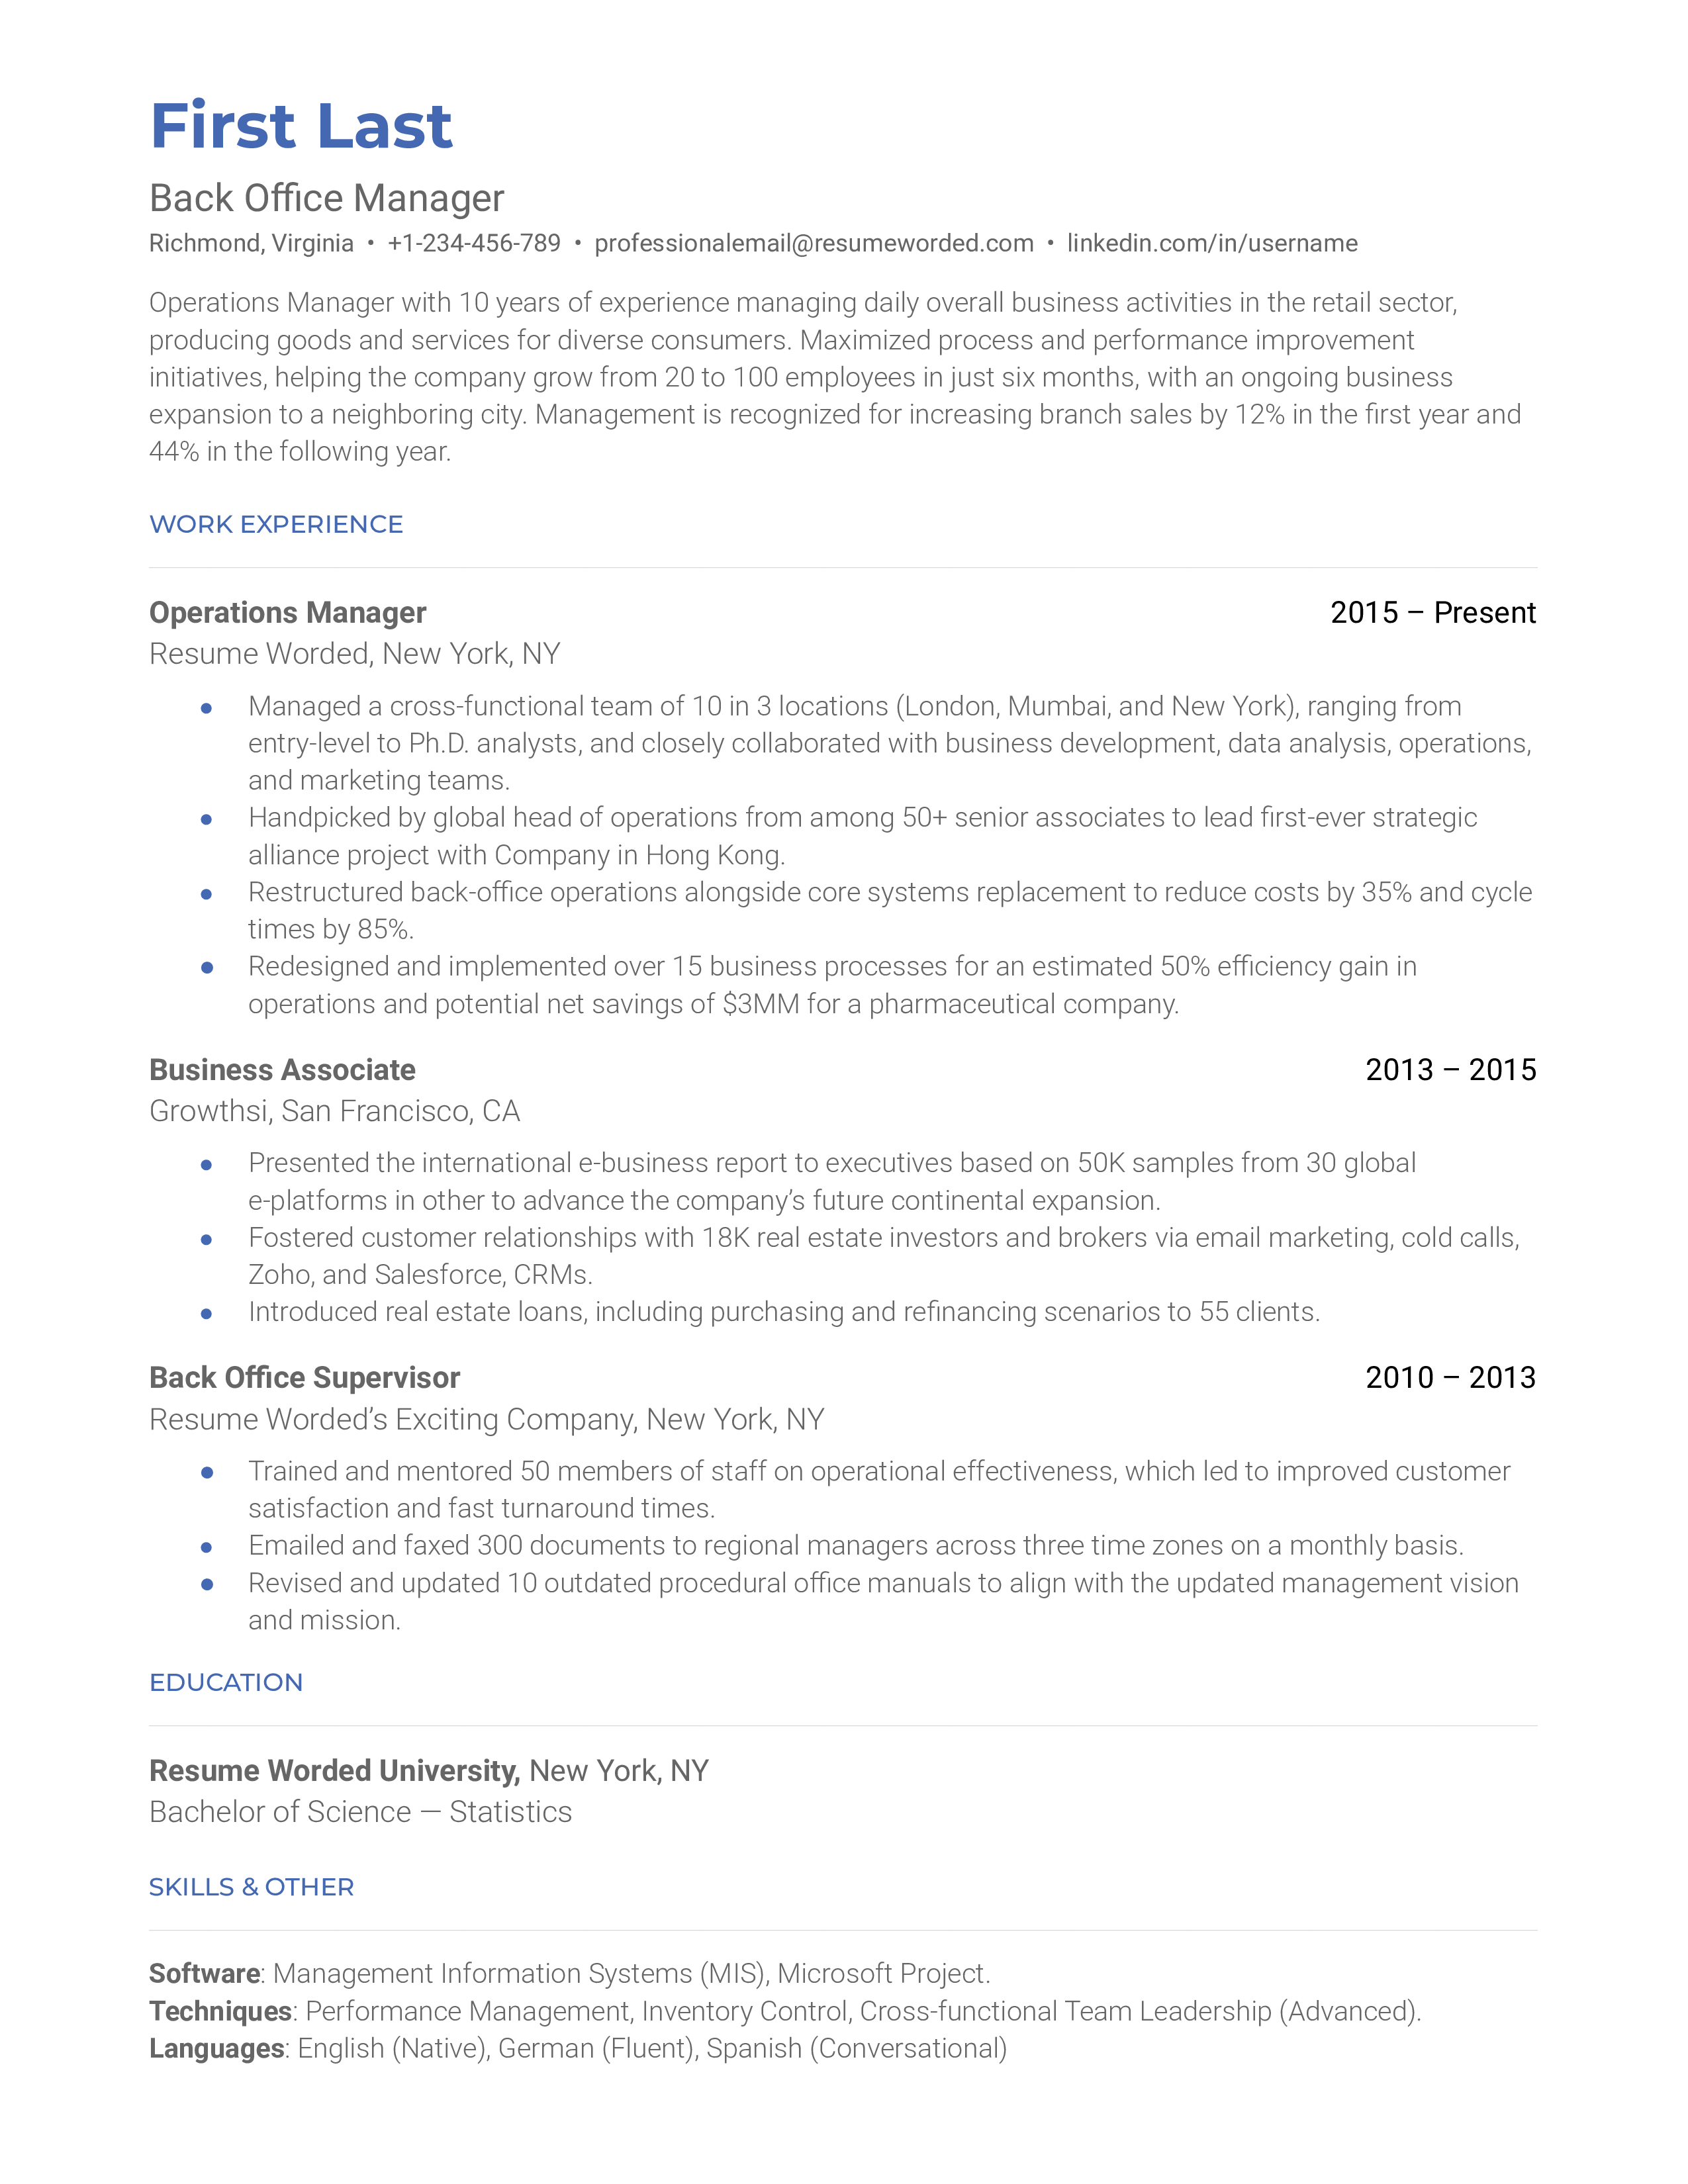 Back Office Manager Resume Template + Example